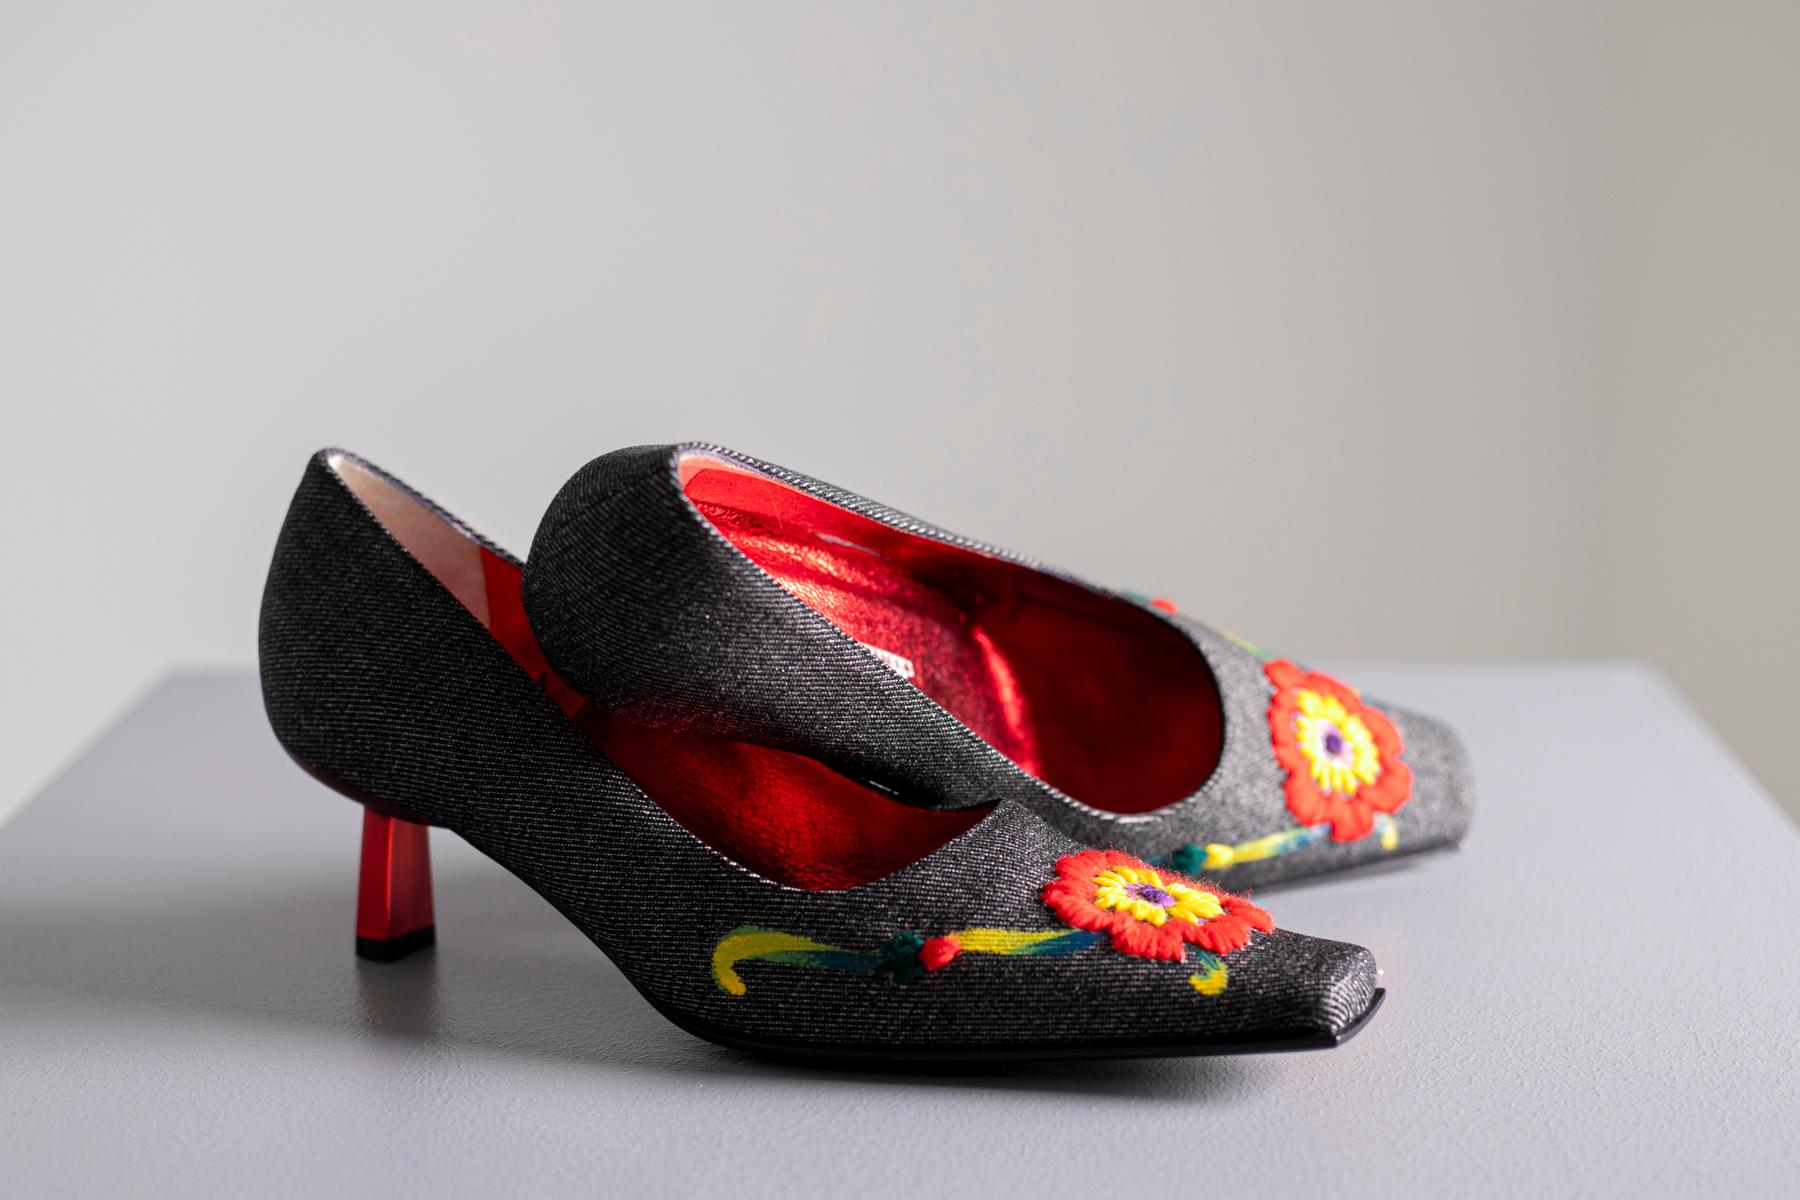 Very special Giuseppe Zanotti women's shoes. Extraordinary manufacture, the shoes are lined with rigid canvas and have yellow and red flowers embroidered on the toe and tempera details that make them look like a work of art. The inside of the shoe